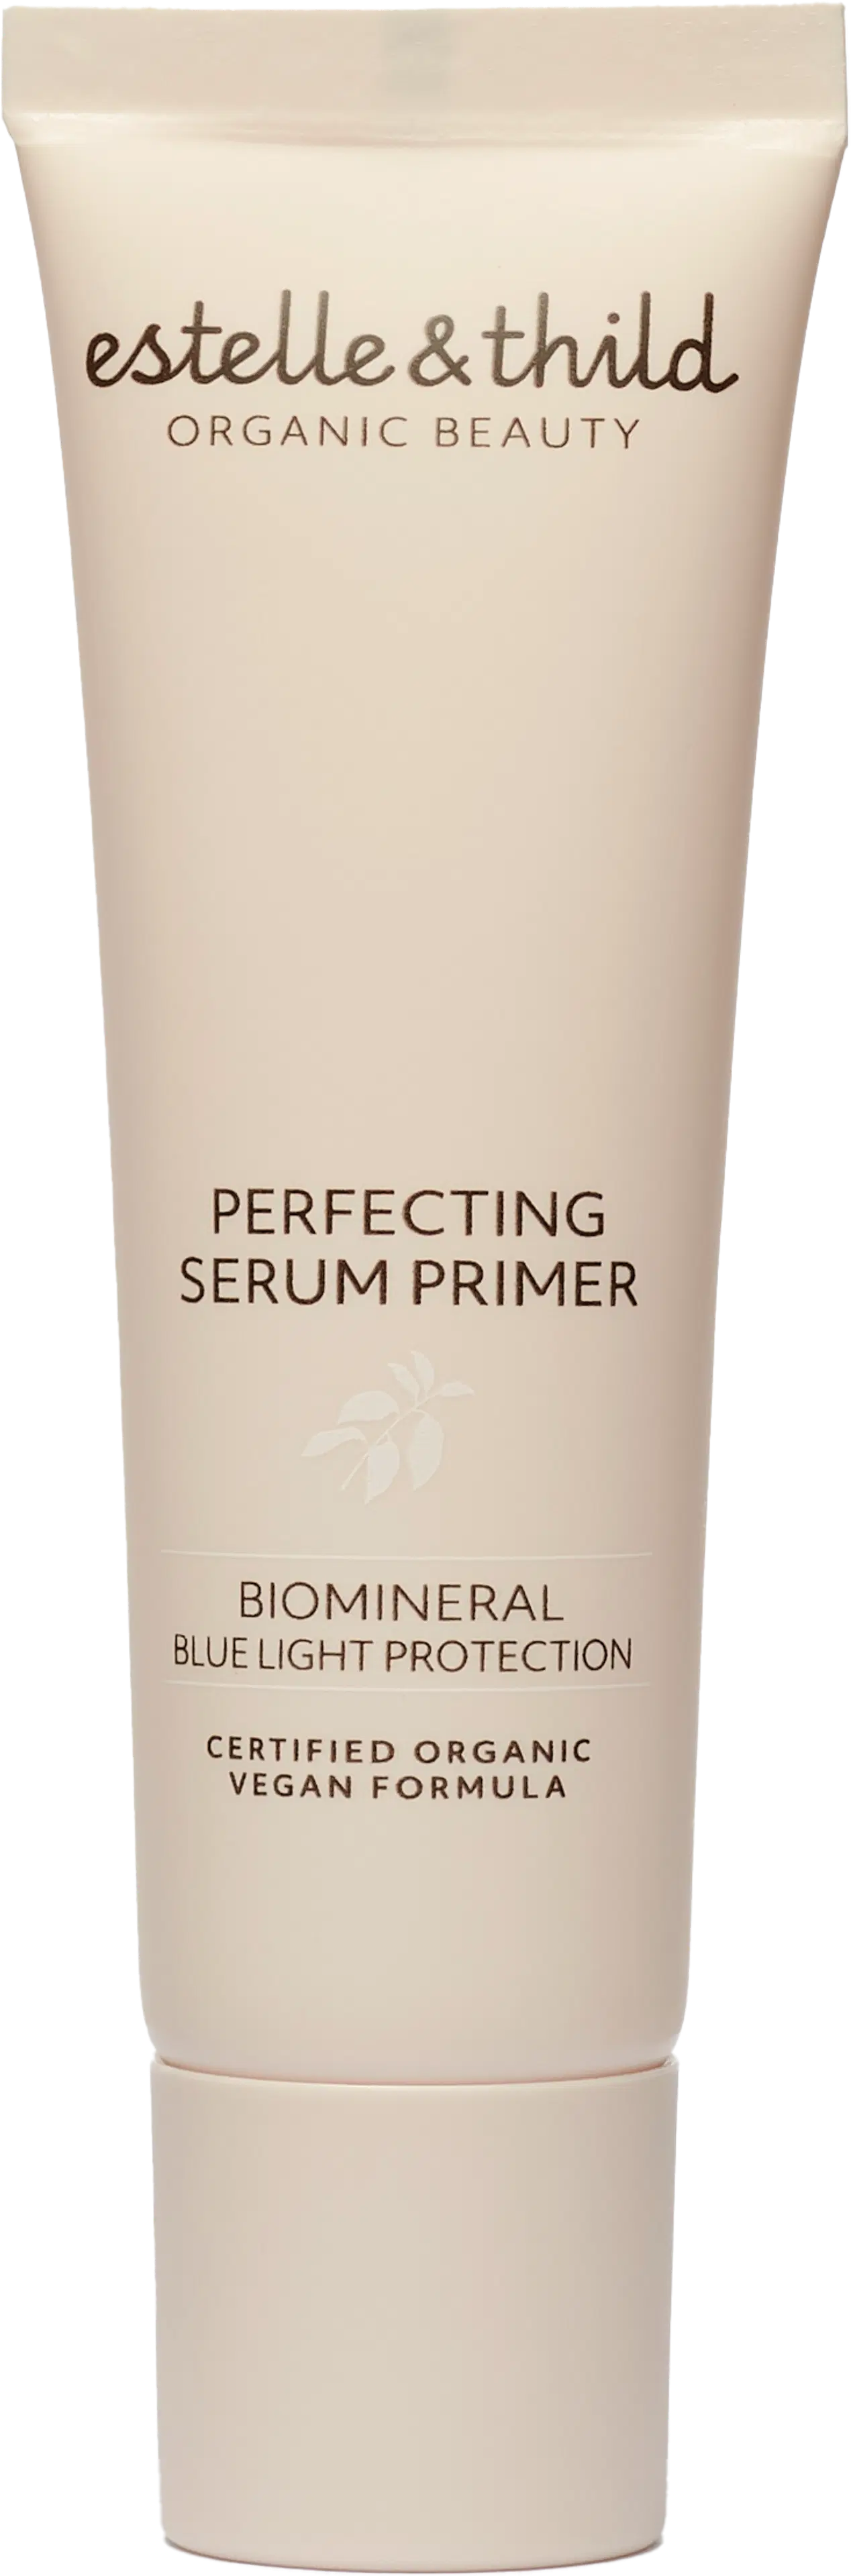 Biomineral perfecting blue light protection serum primer